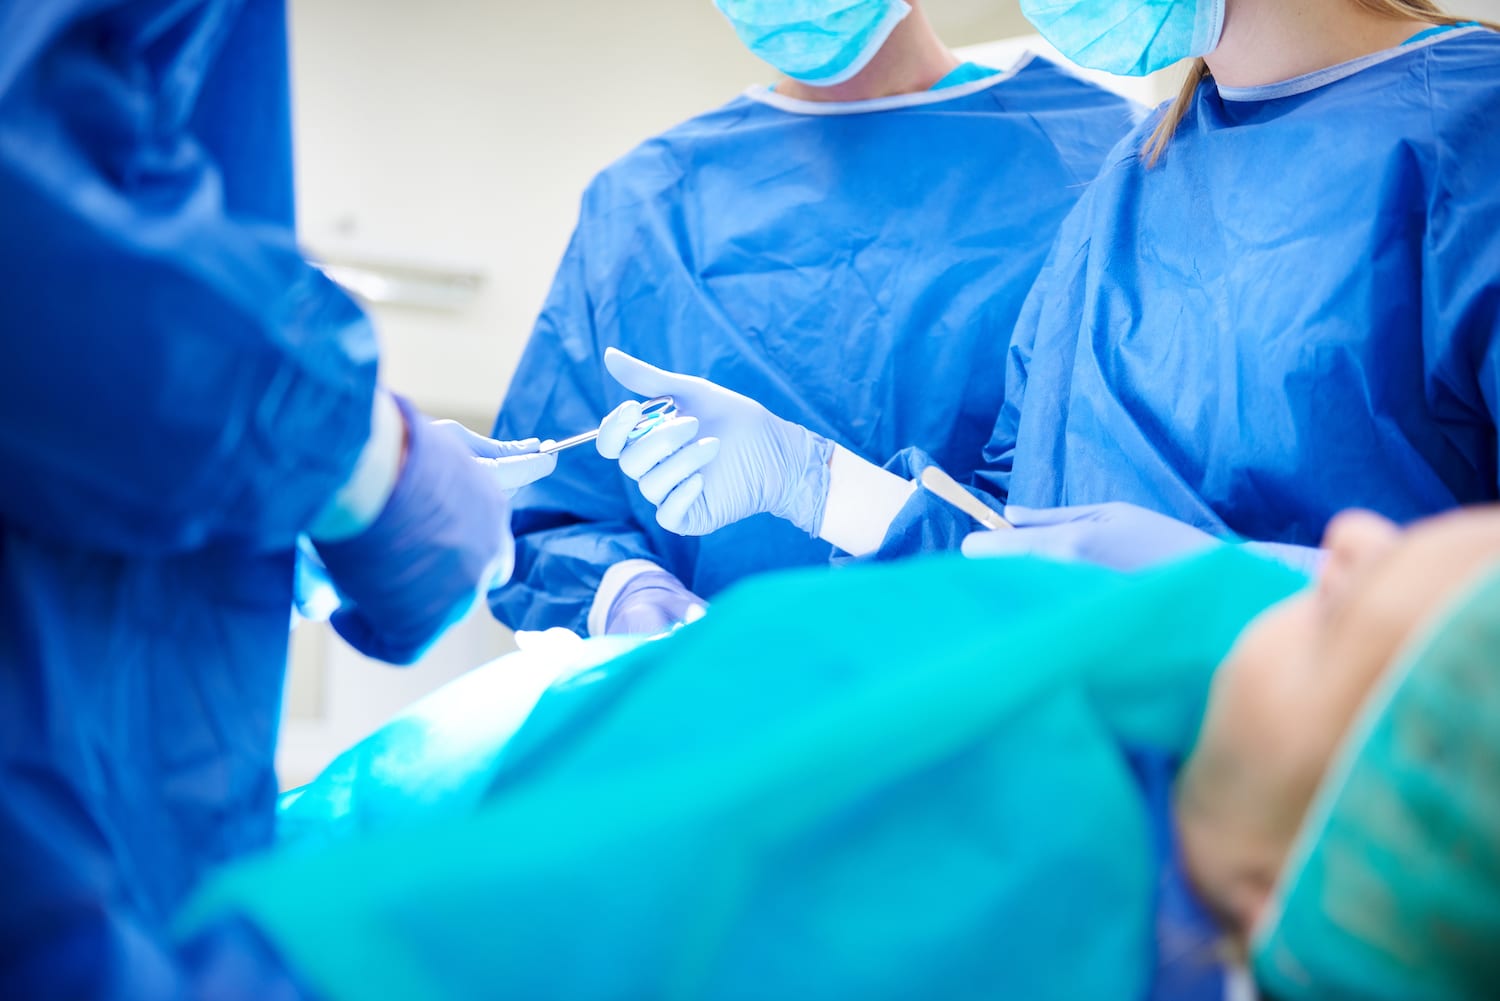 surgery team operating on a patient